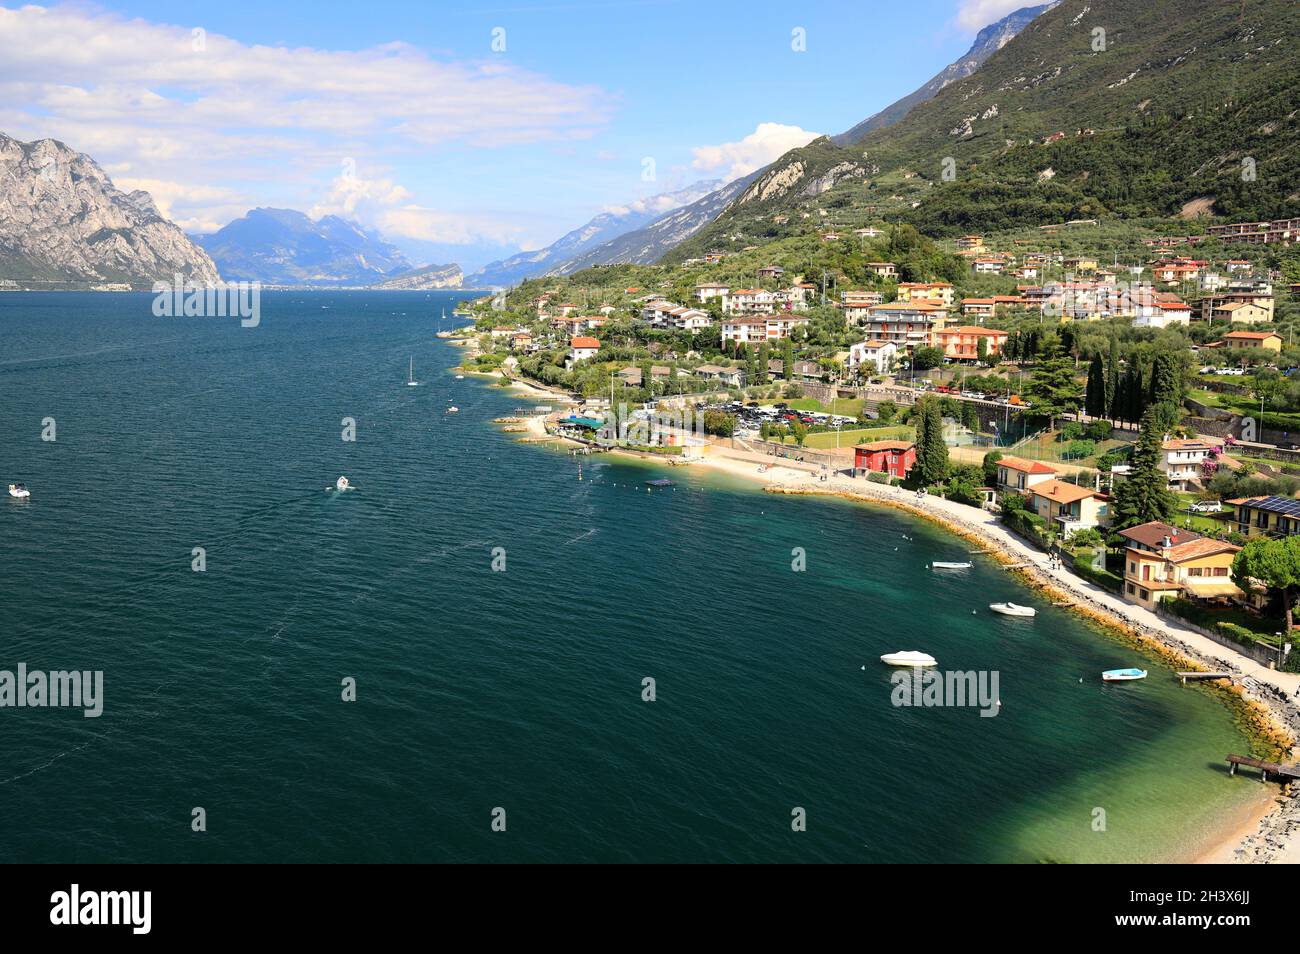 Malcesine at the eastern shore of Lake Garda. Lombardy, northern Italy, Europe. Stock Photo